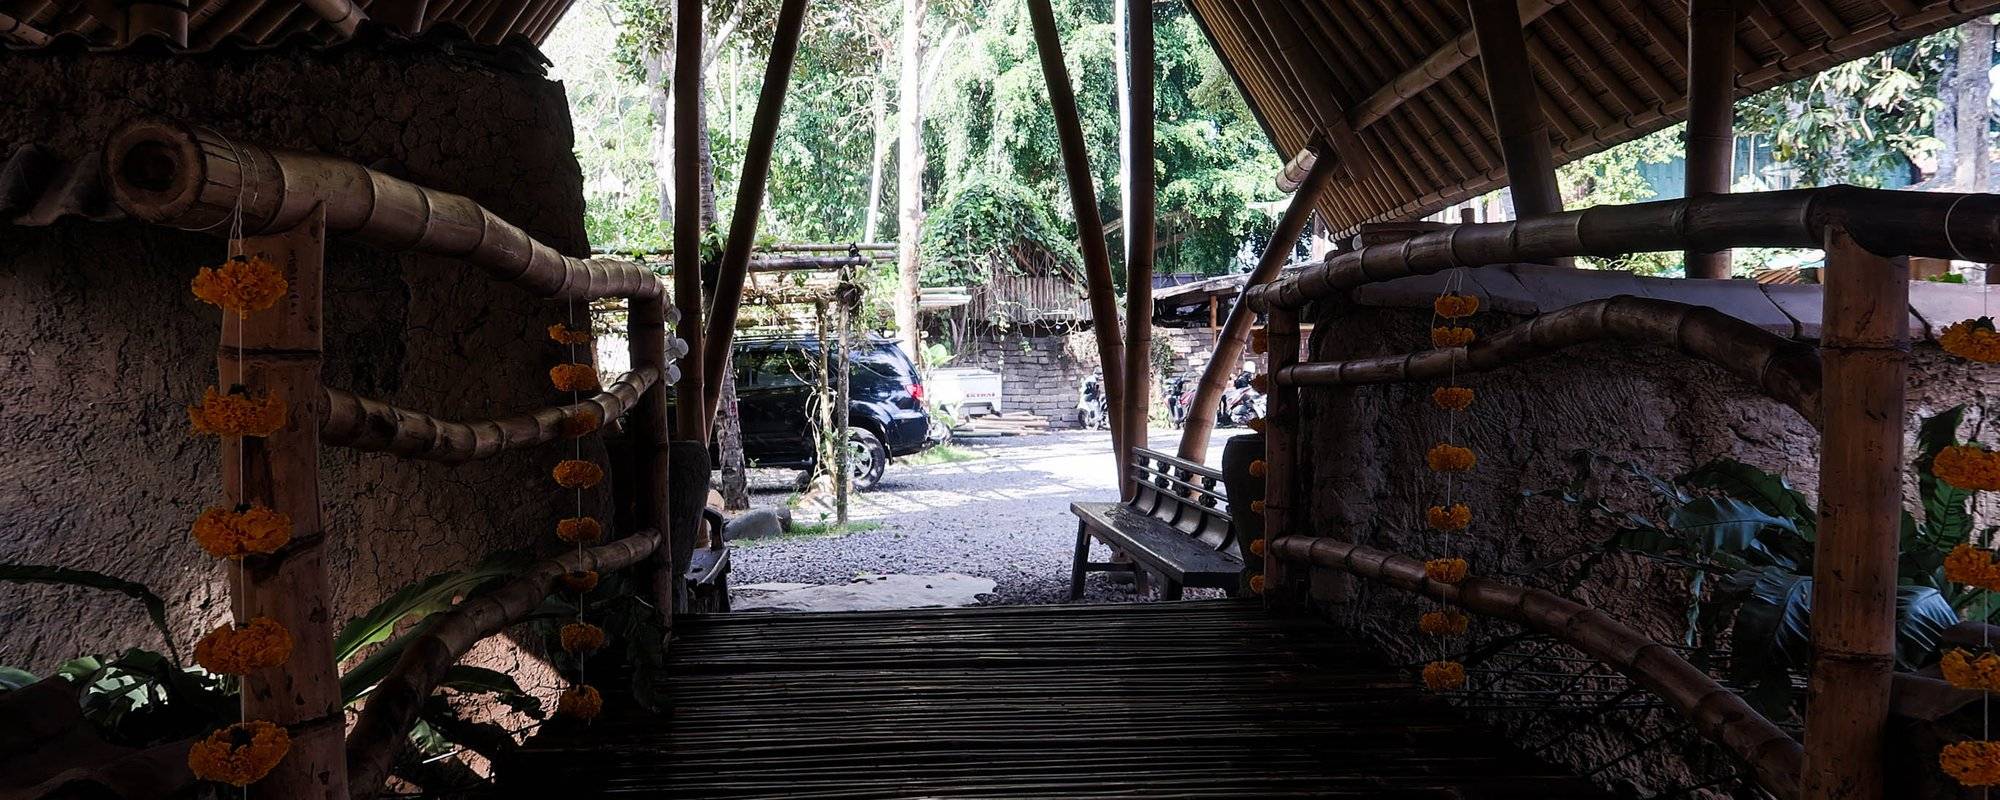 My Tour To The Bamboo Hotel in Bali